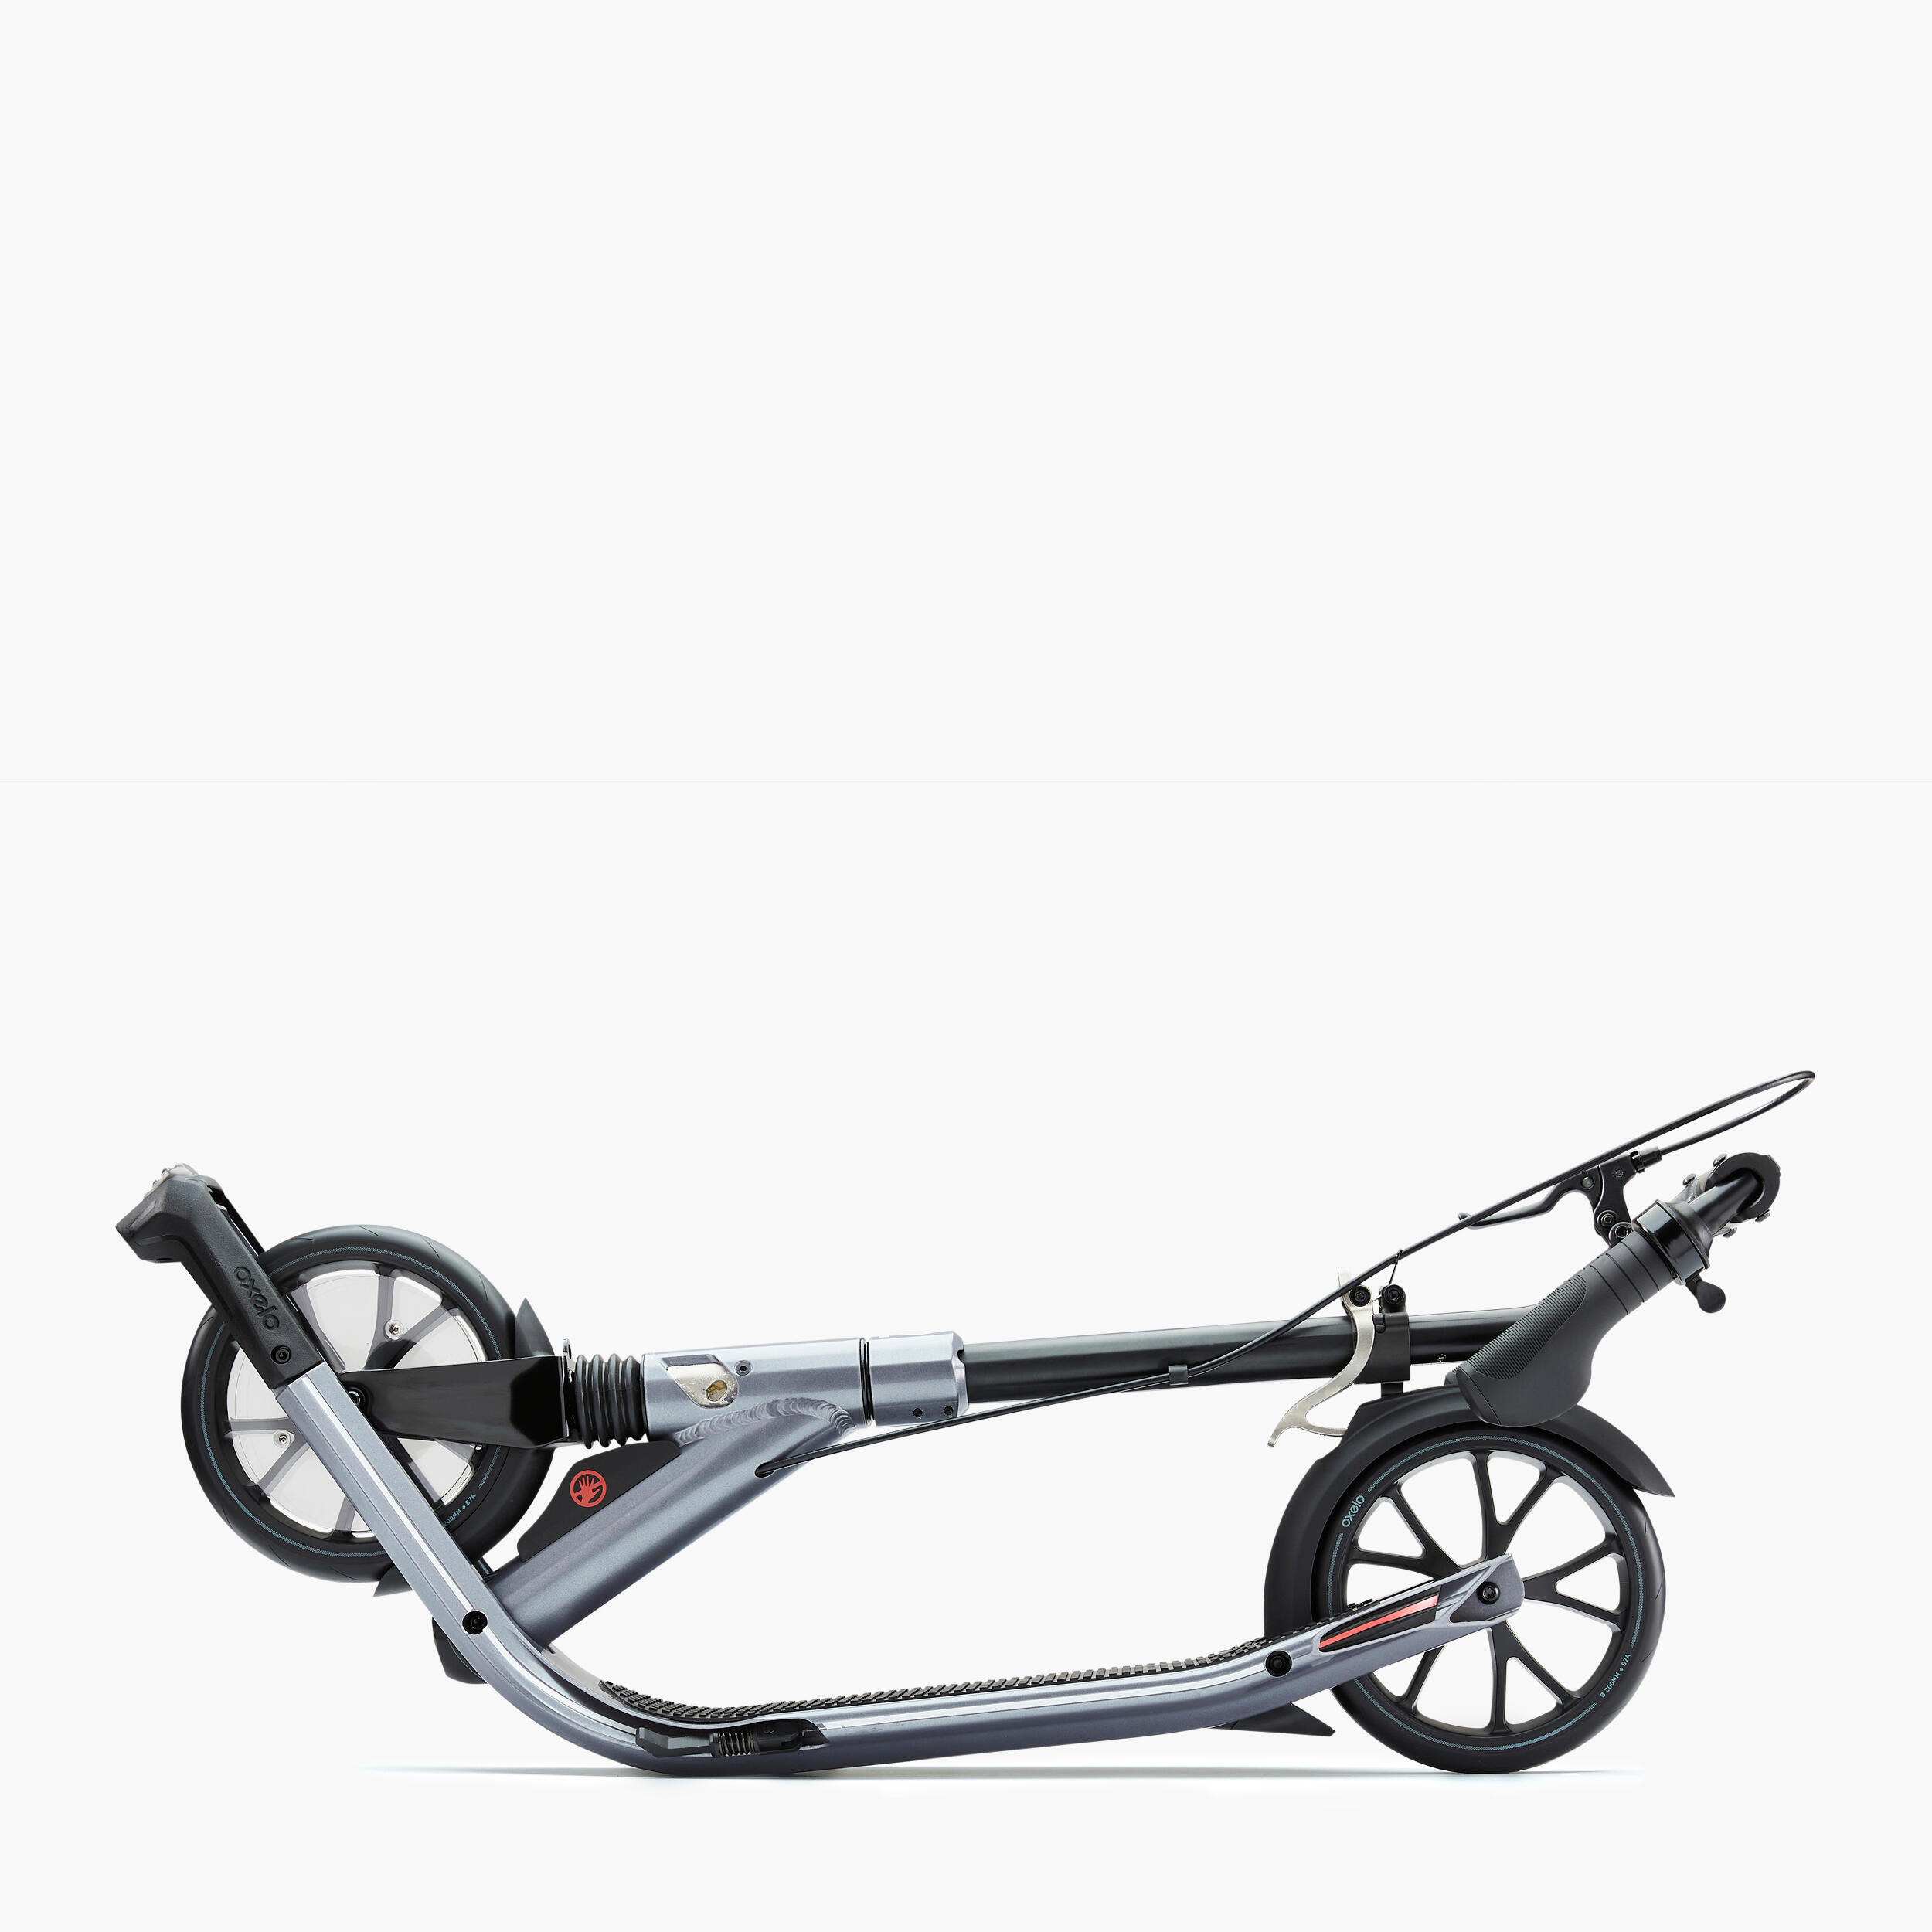 Adult Scooter Commute 900 - Grey 4/10